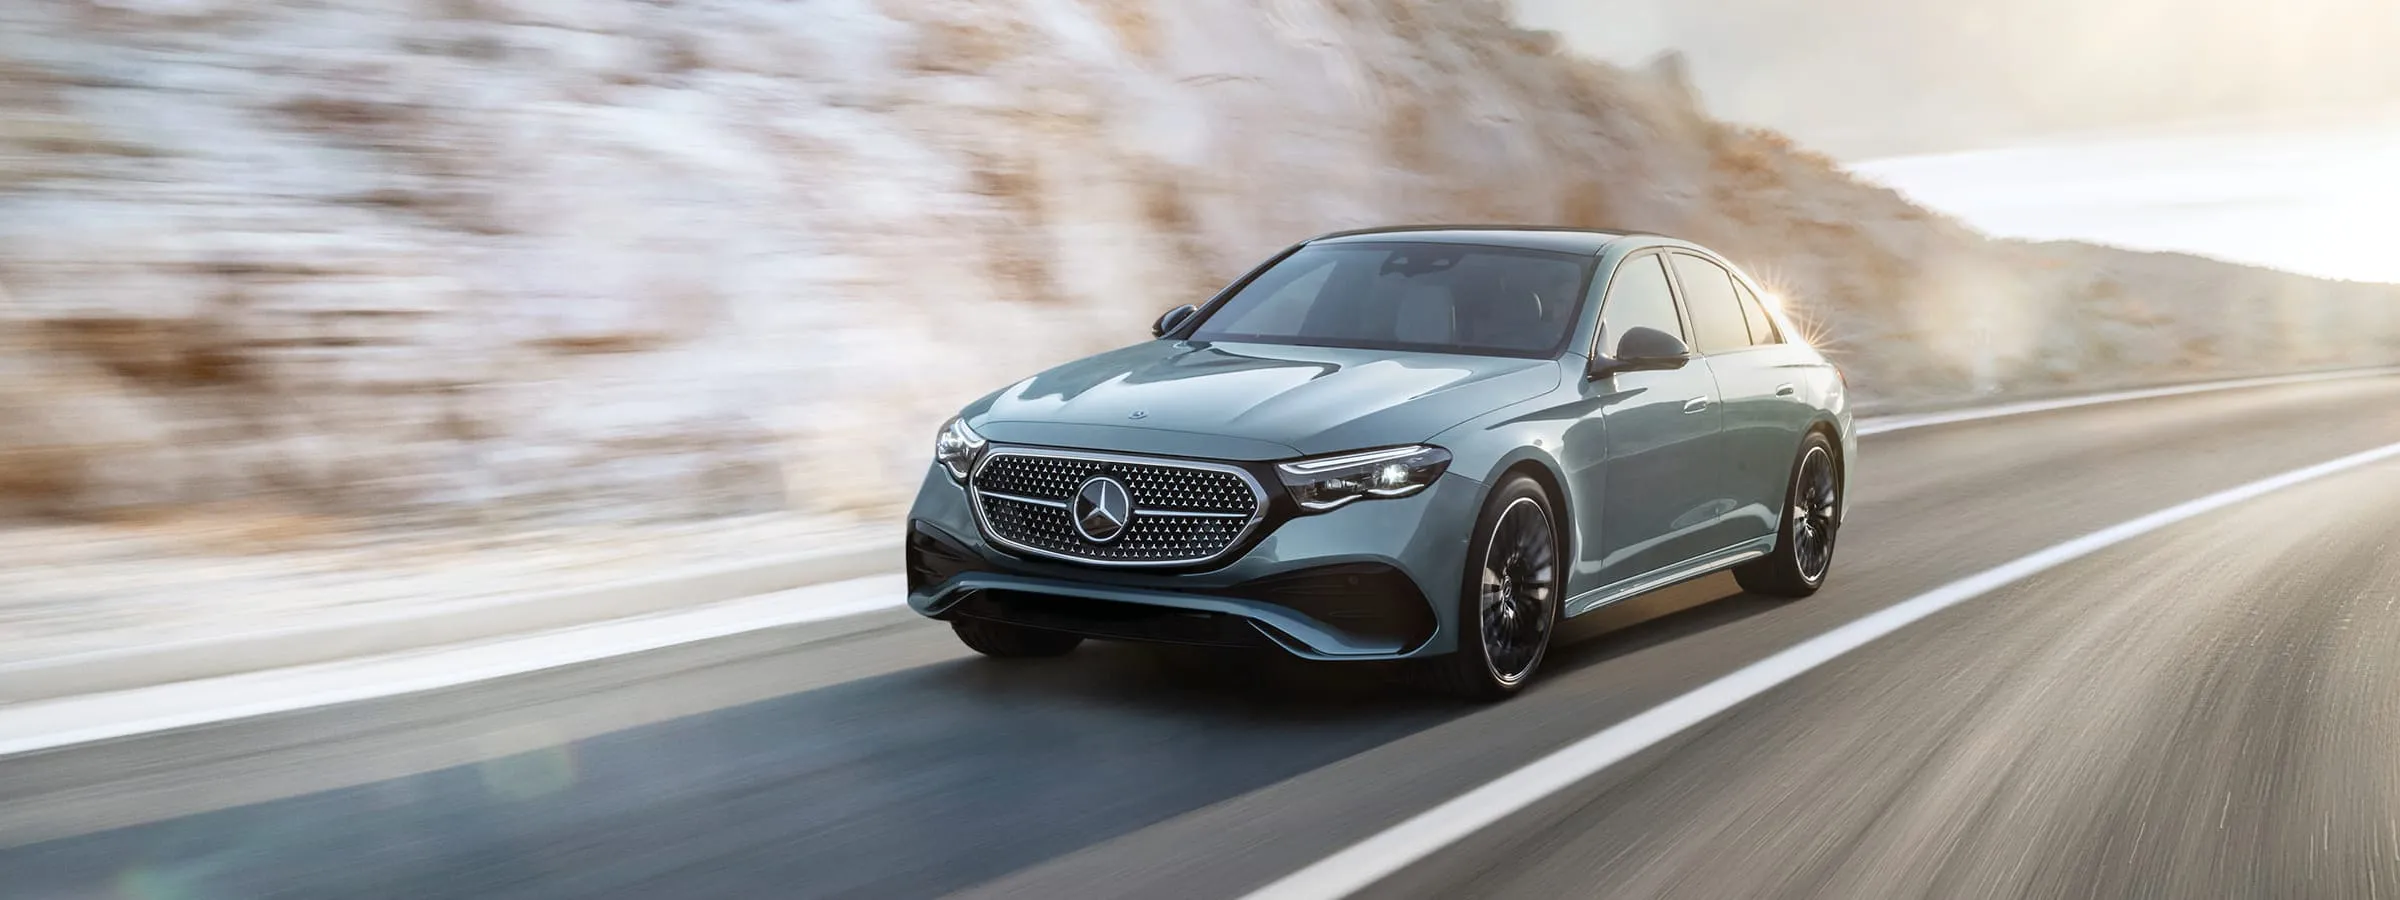 The best new Mercedes-Benz models coming by 2025: all you need to